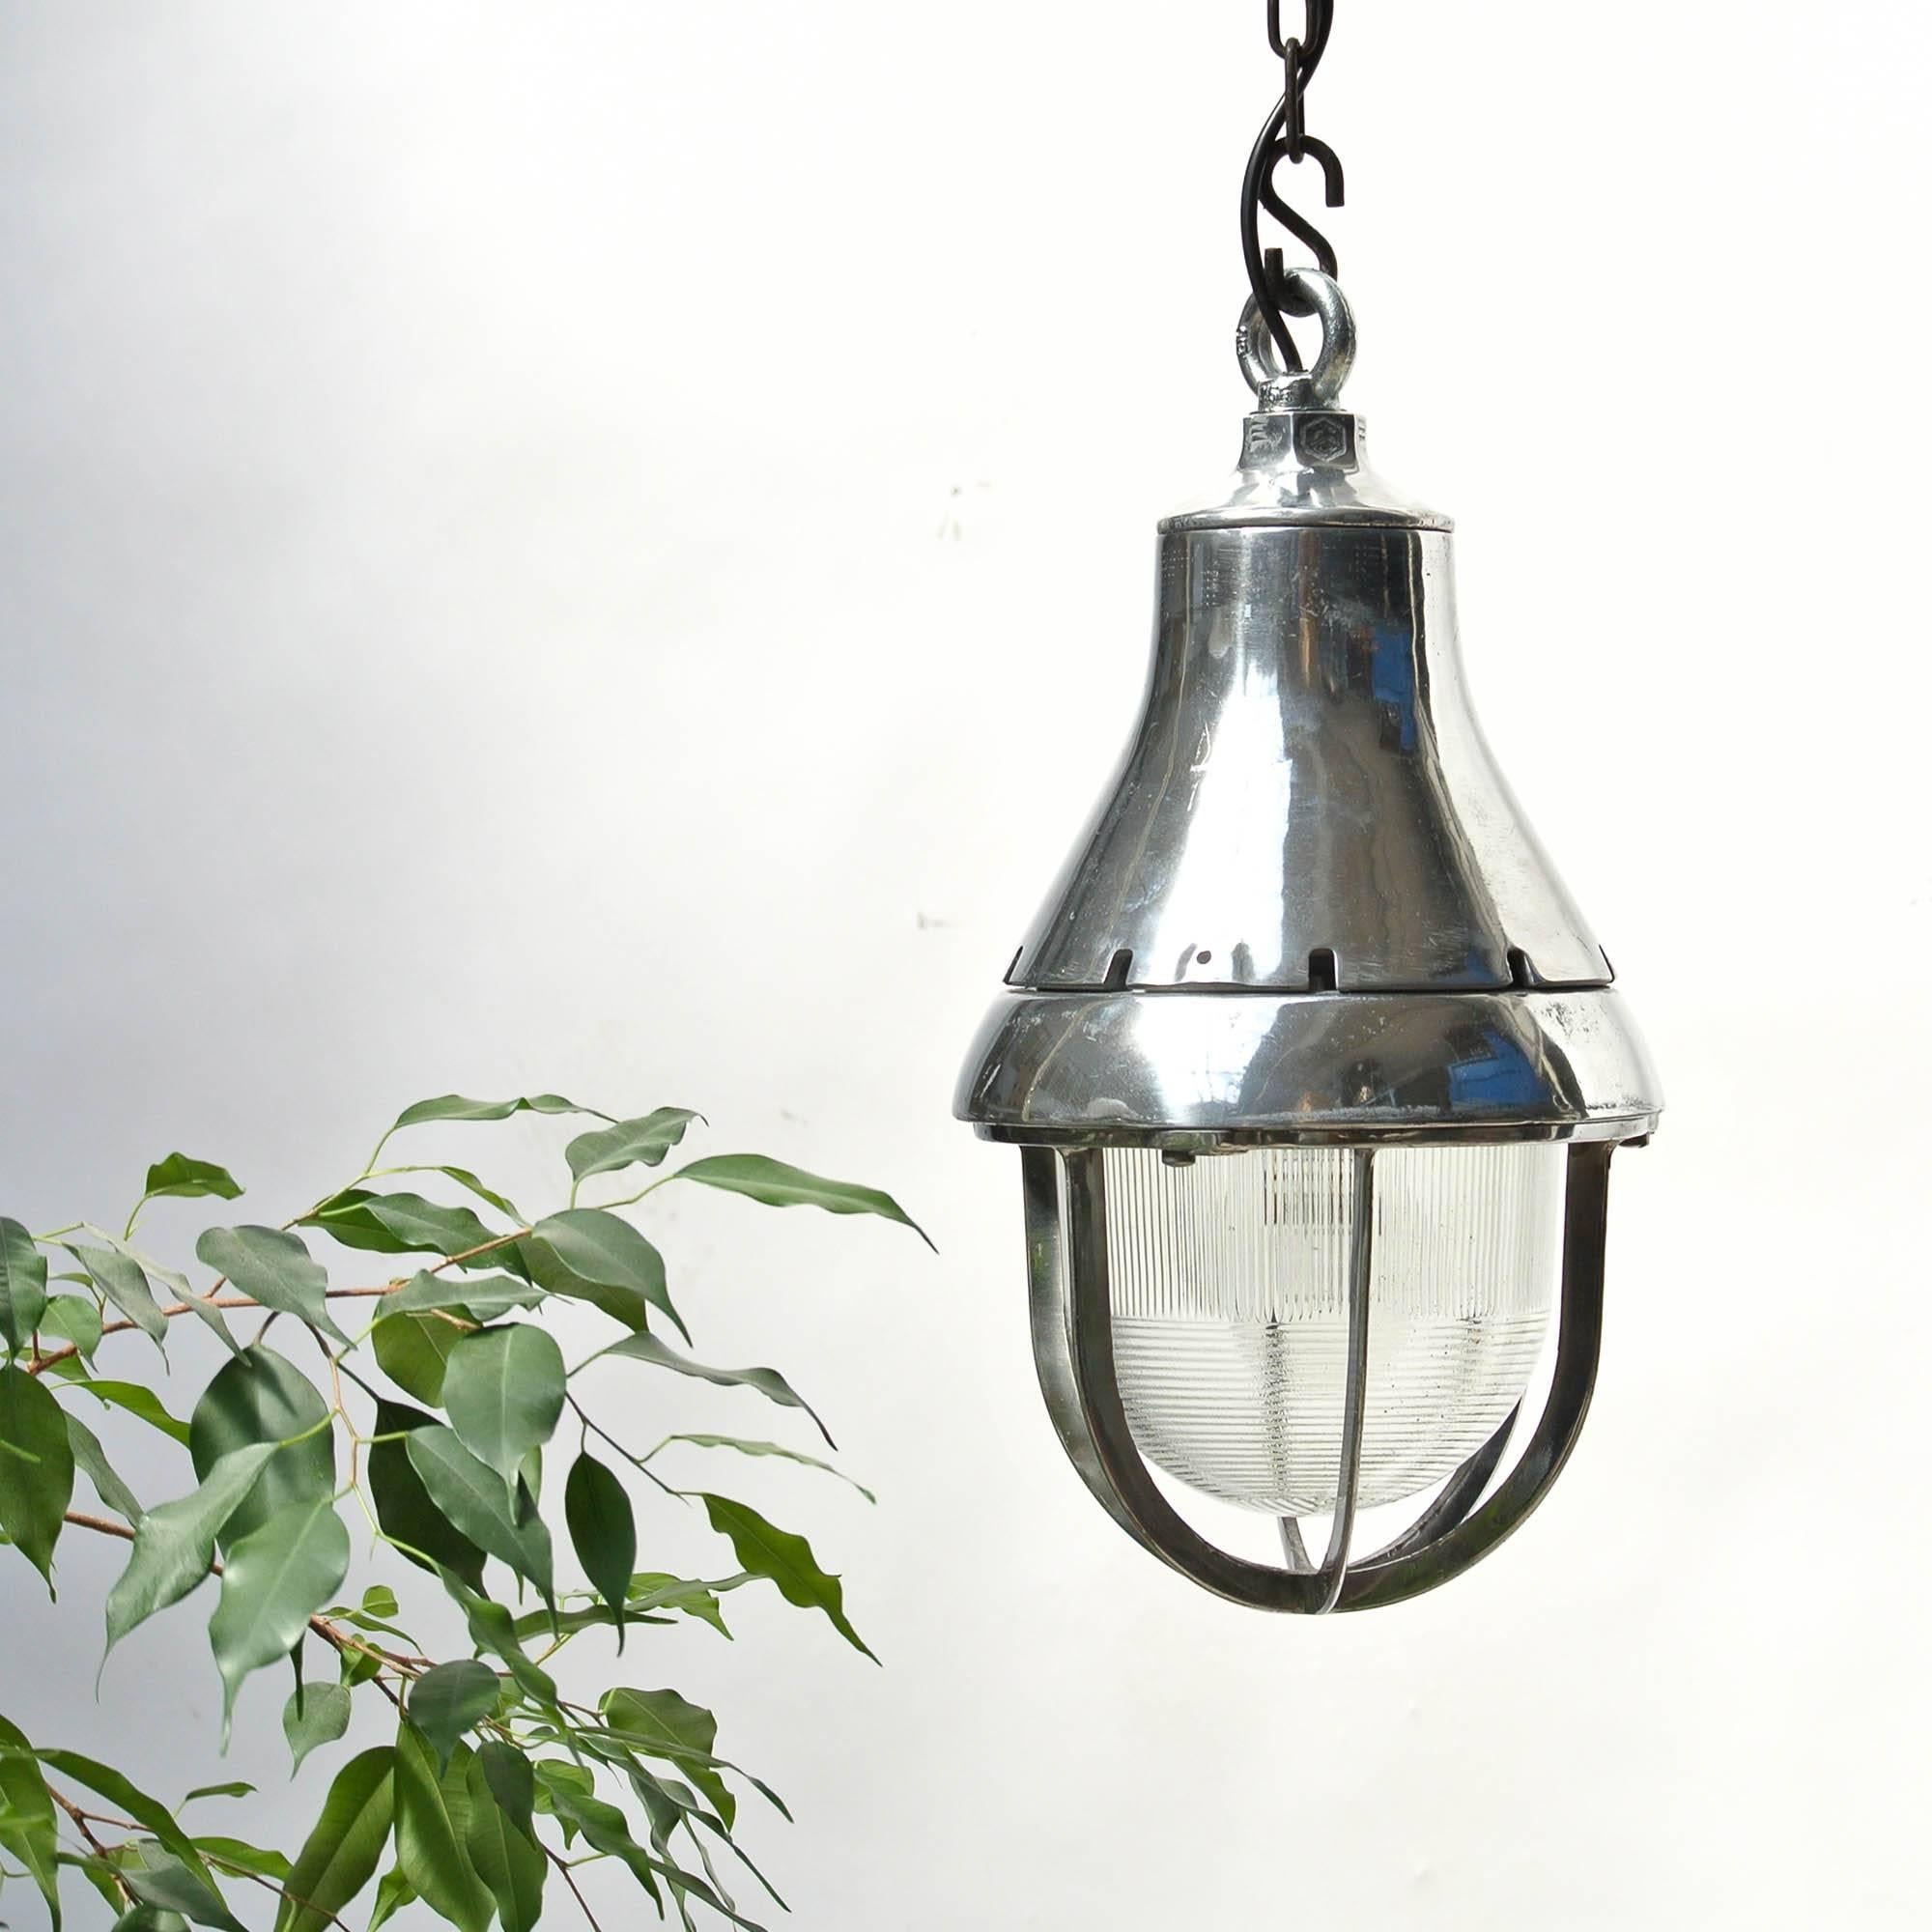 Reeded Glass American ceiling Lamp in Polished Aluminium, circa 1950-1959